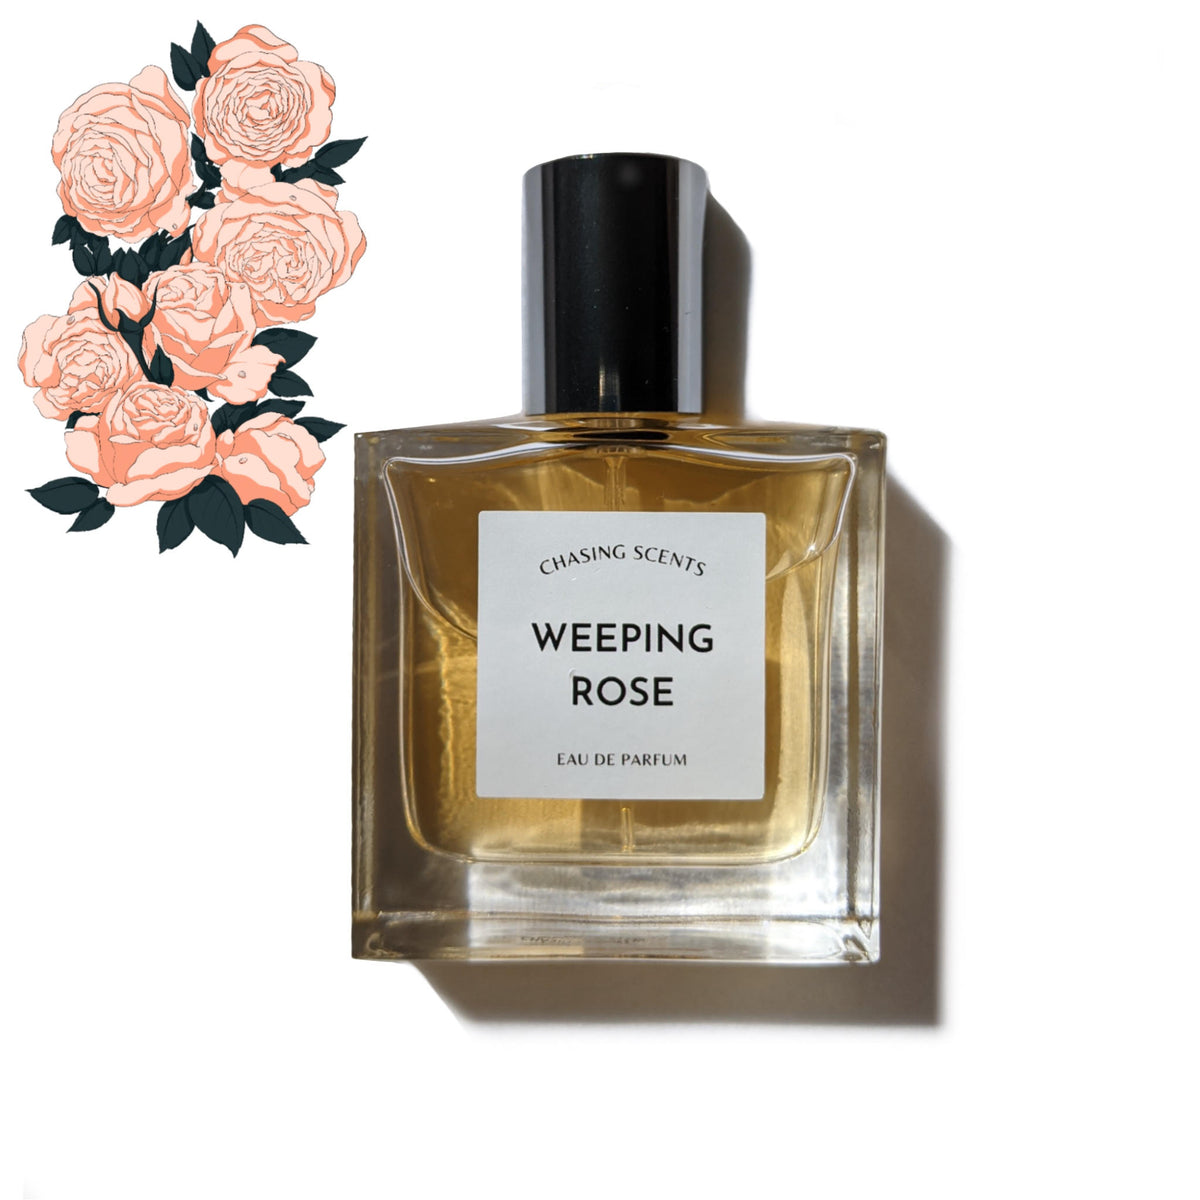 WEEPING ROSE – Chasing Scents